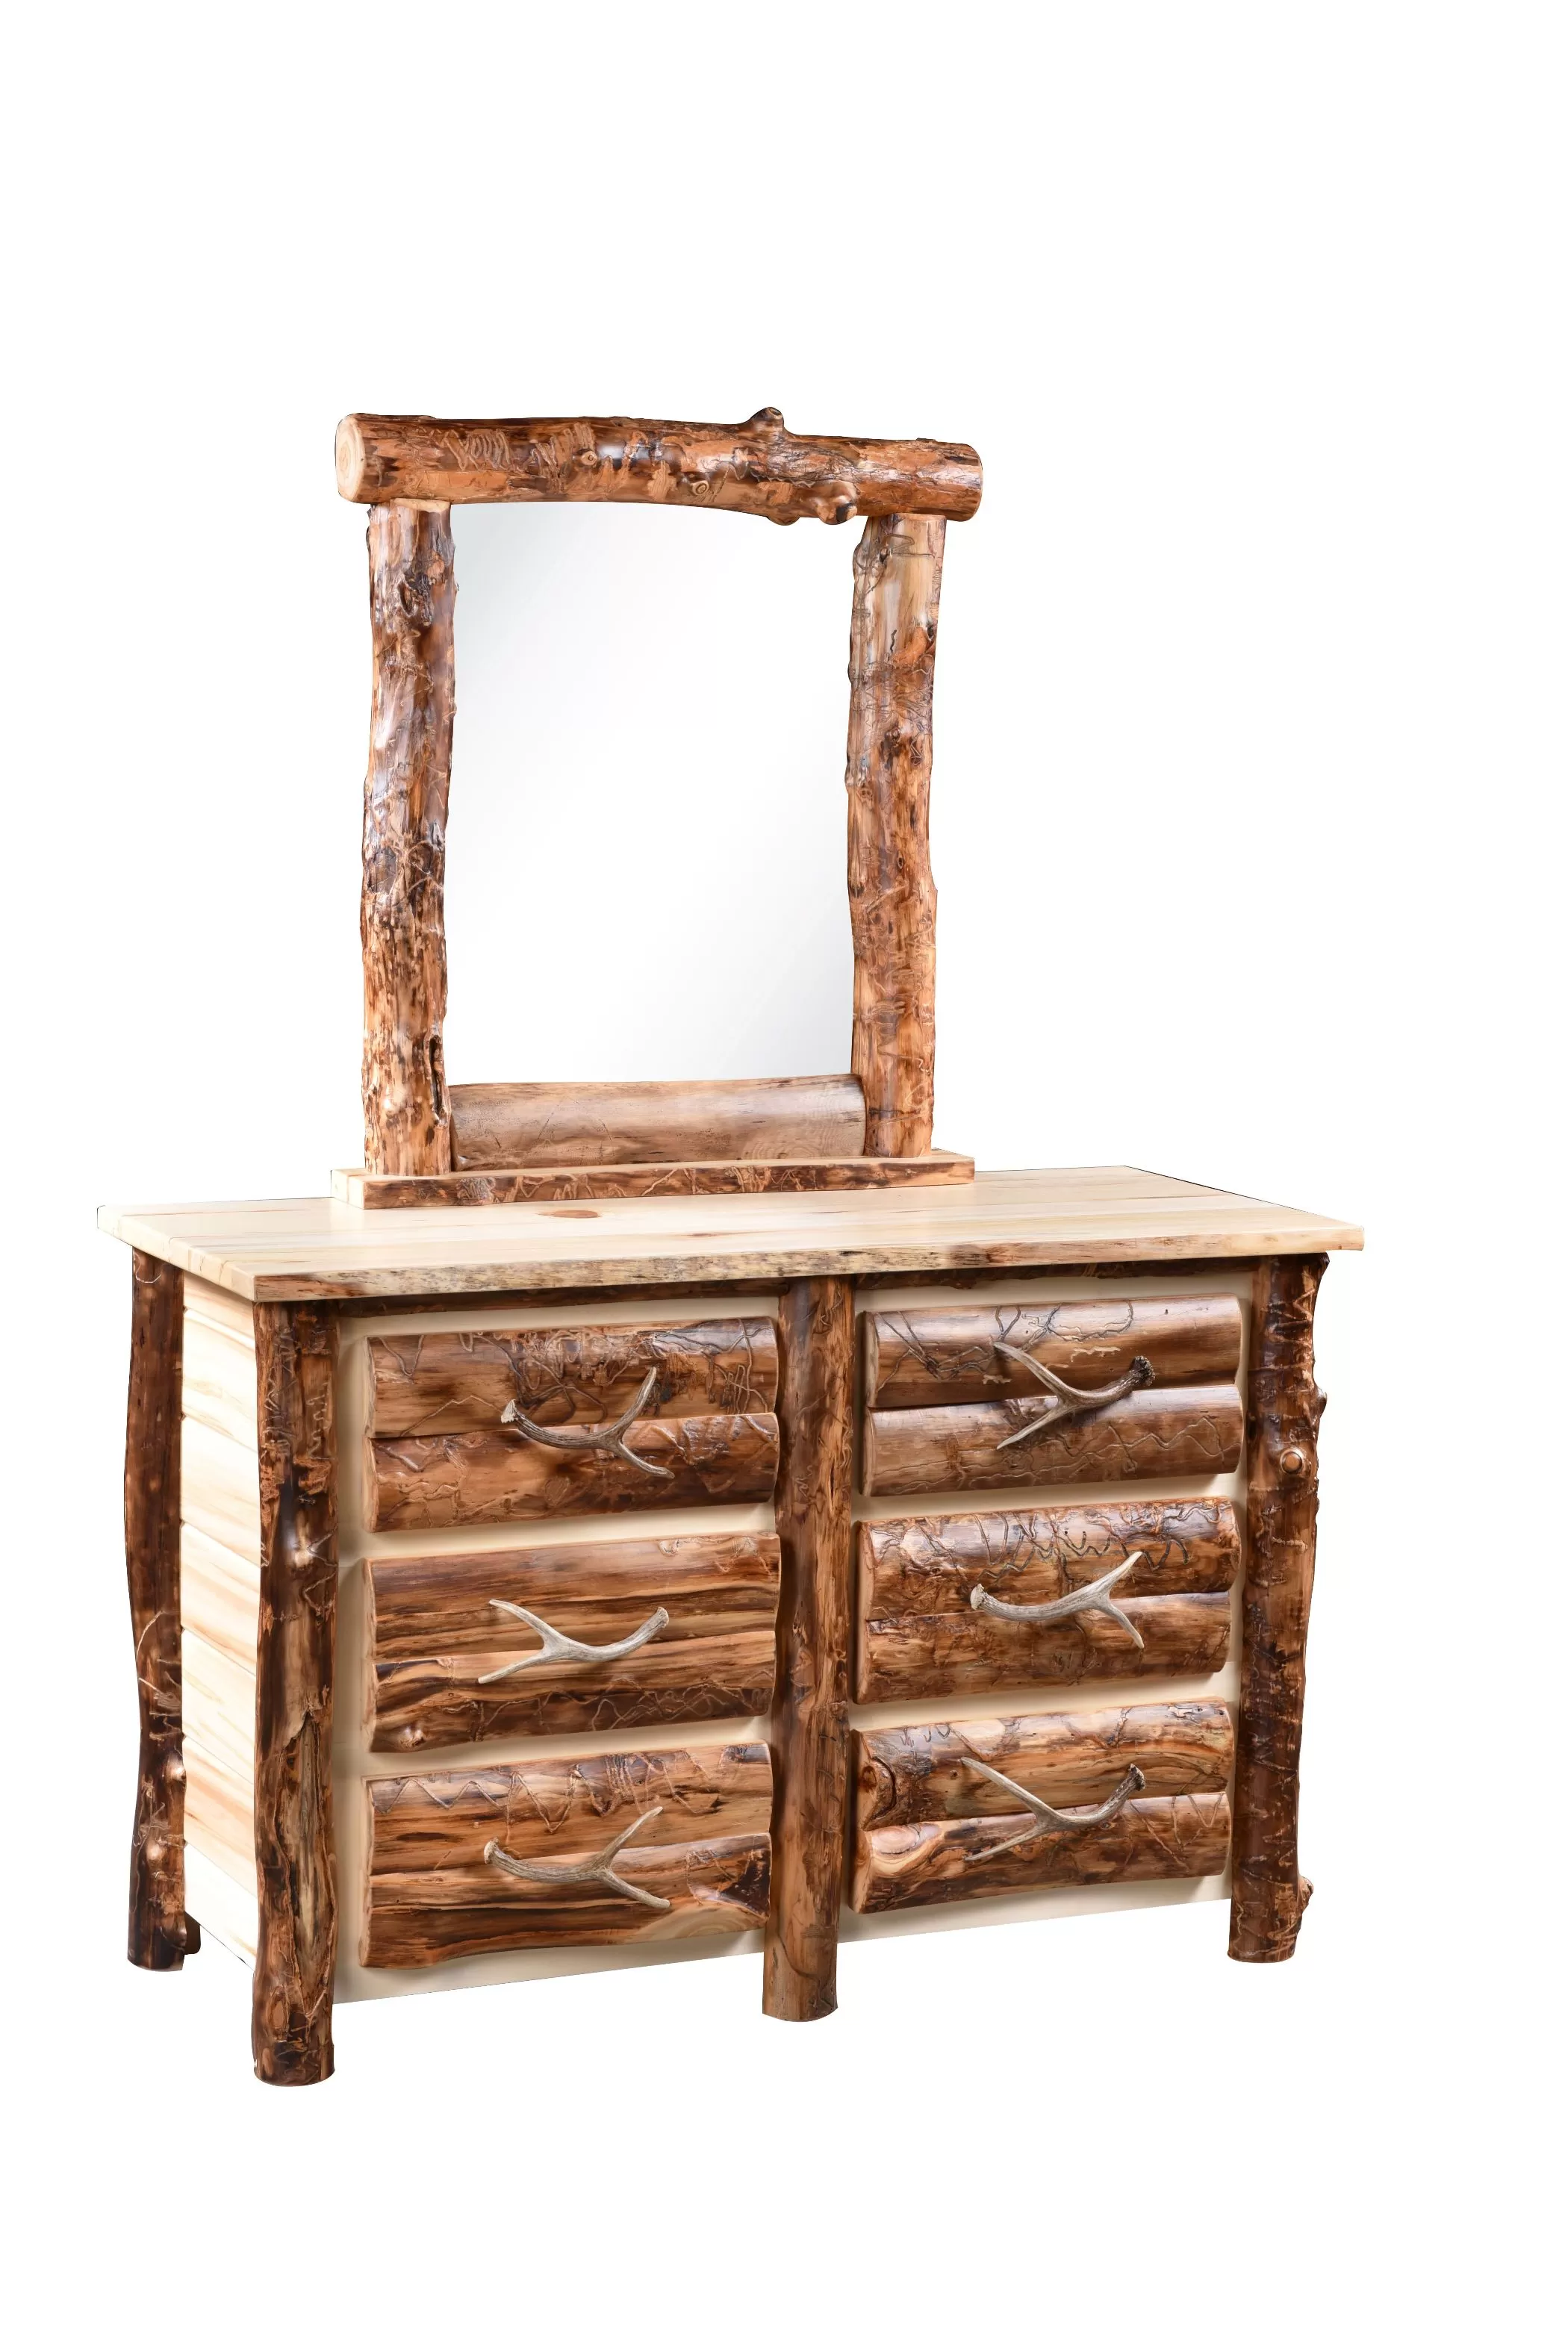 Rocky Mountain 6 Drawer Dresser with Log Top Mirror